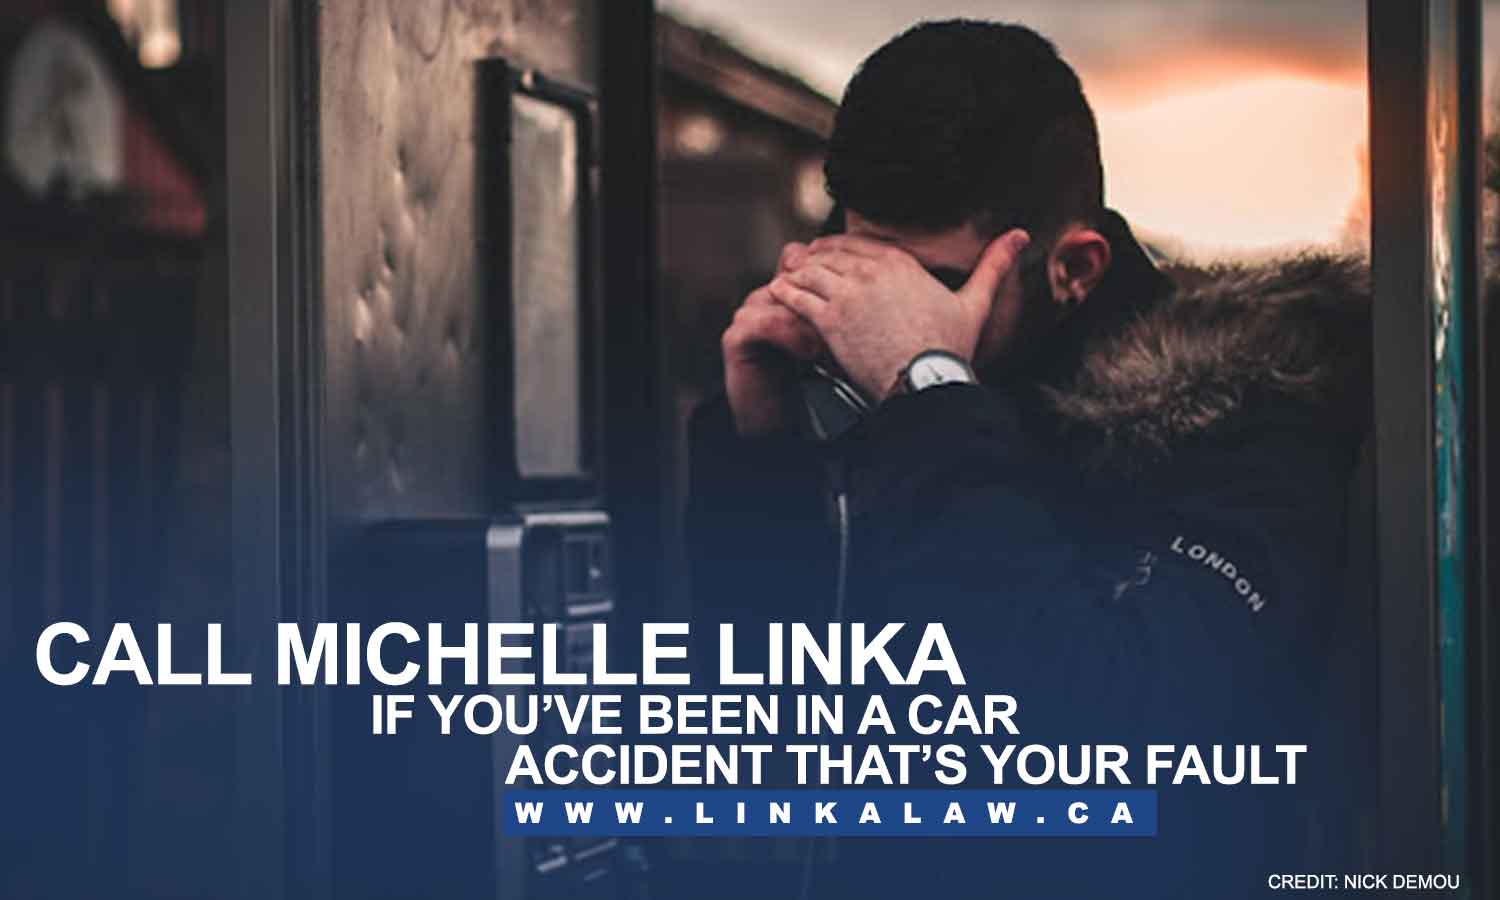 Call Michelle Linka if you’ve been in a car accident that’s your fault